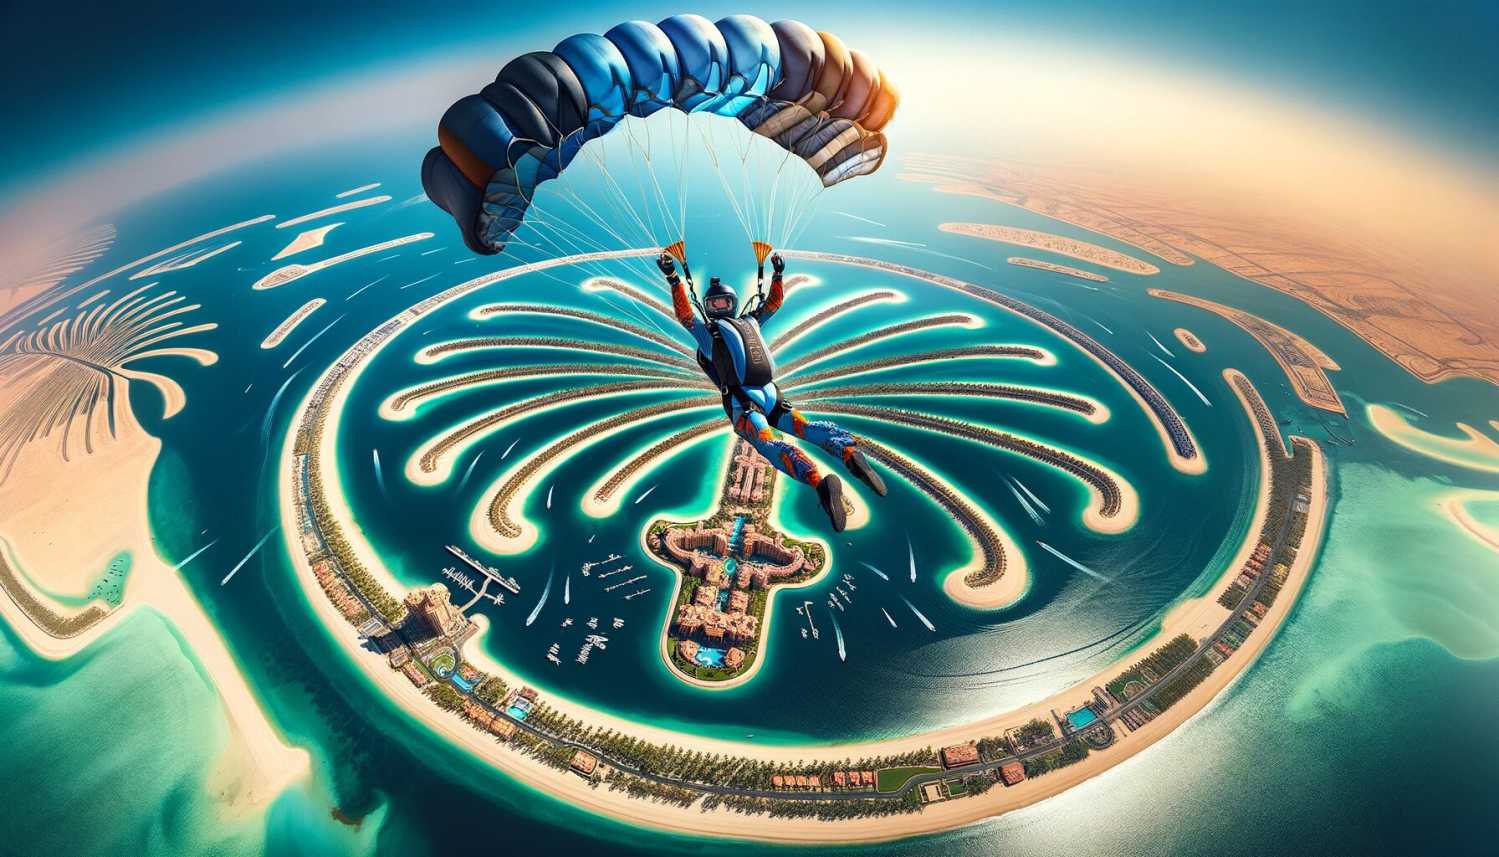 Amazing experience: Skydive Palm Jumeirah